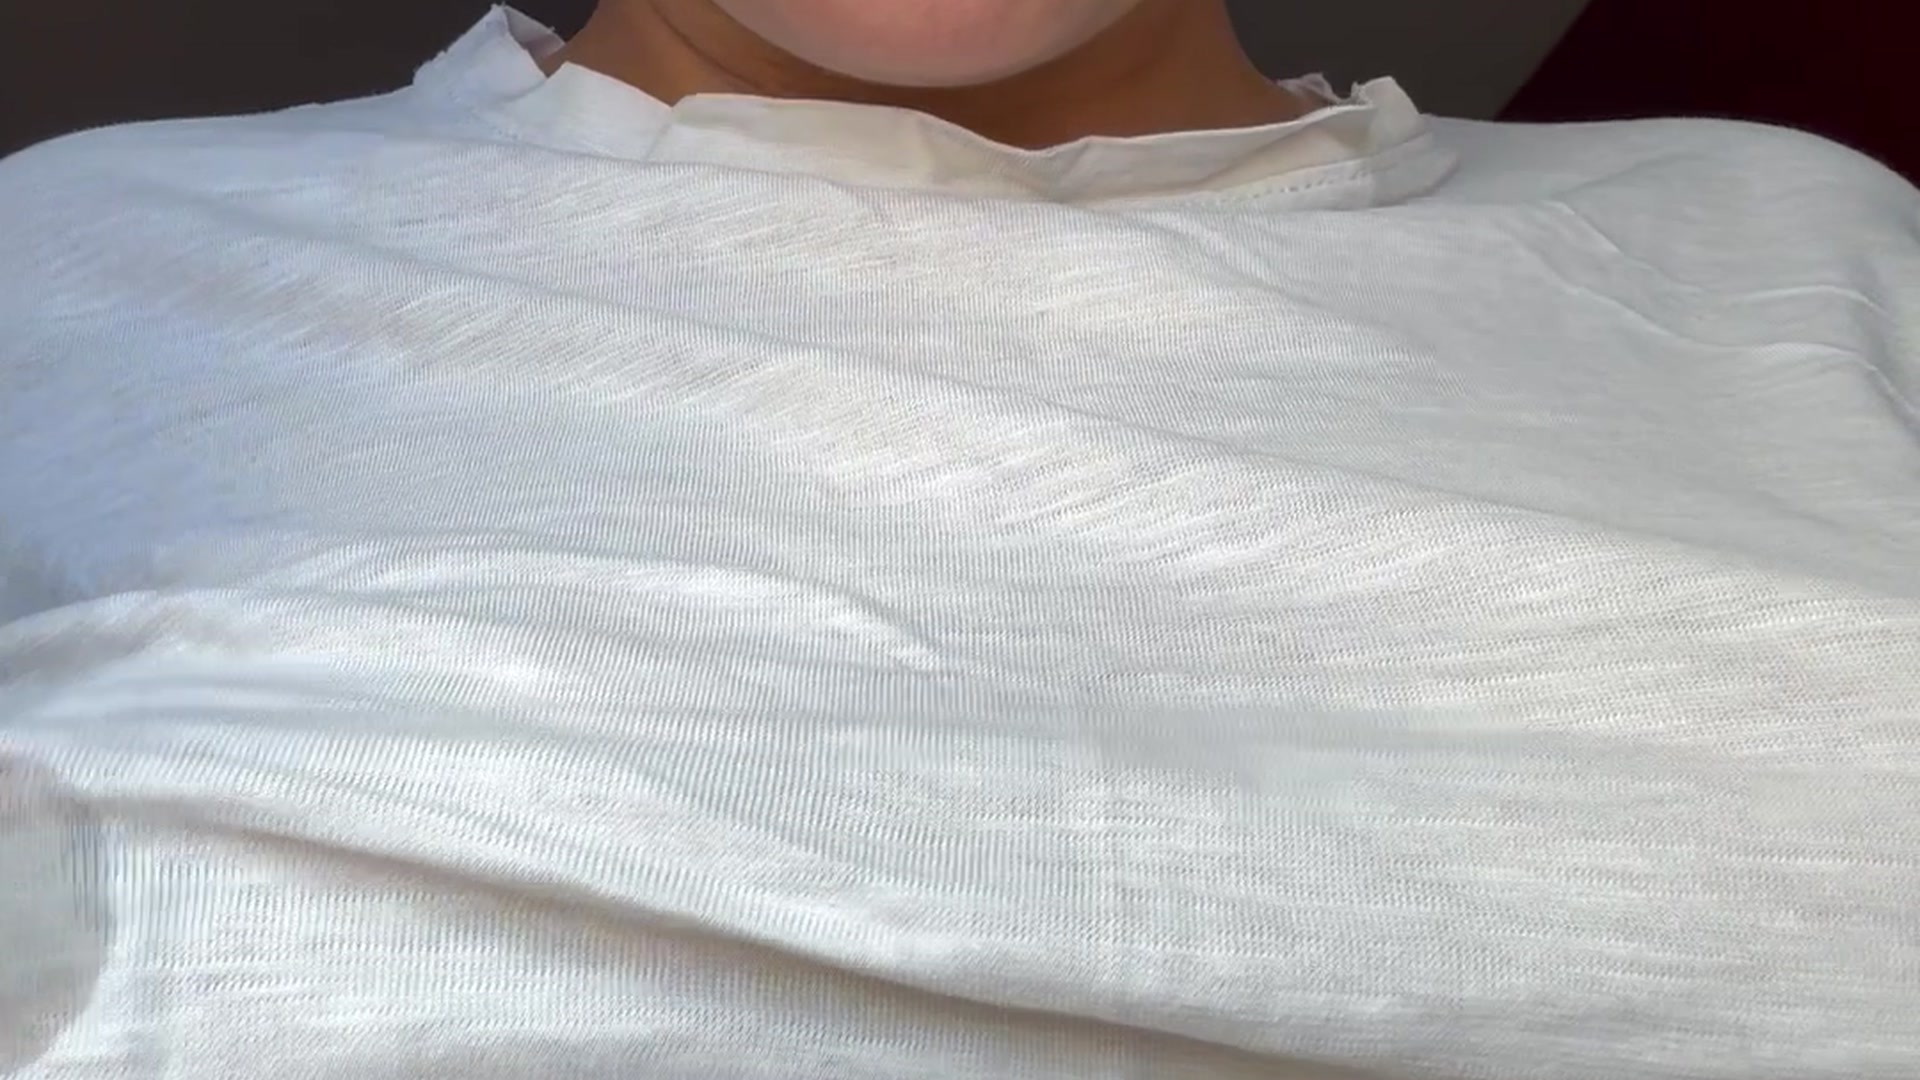 leaky tits in a white t-shirt - mommy dome - CUM DENIAL:)